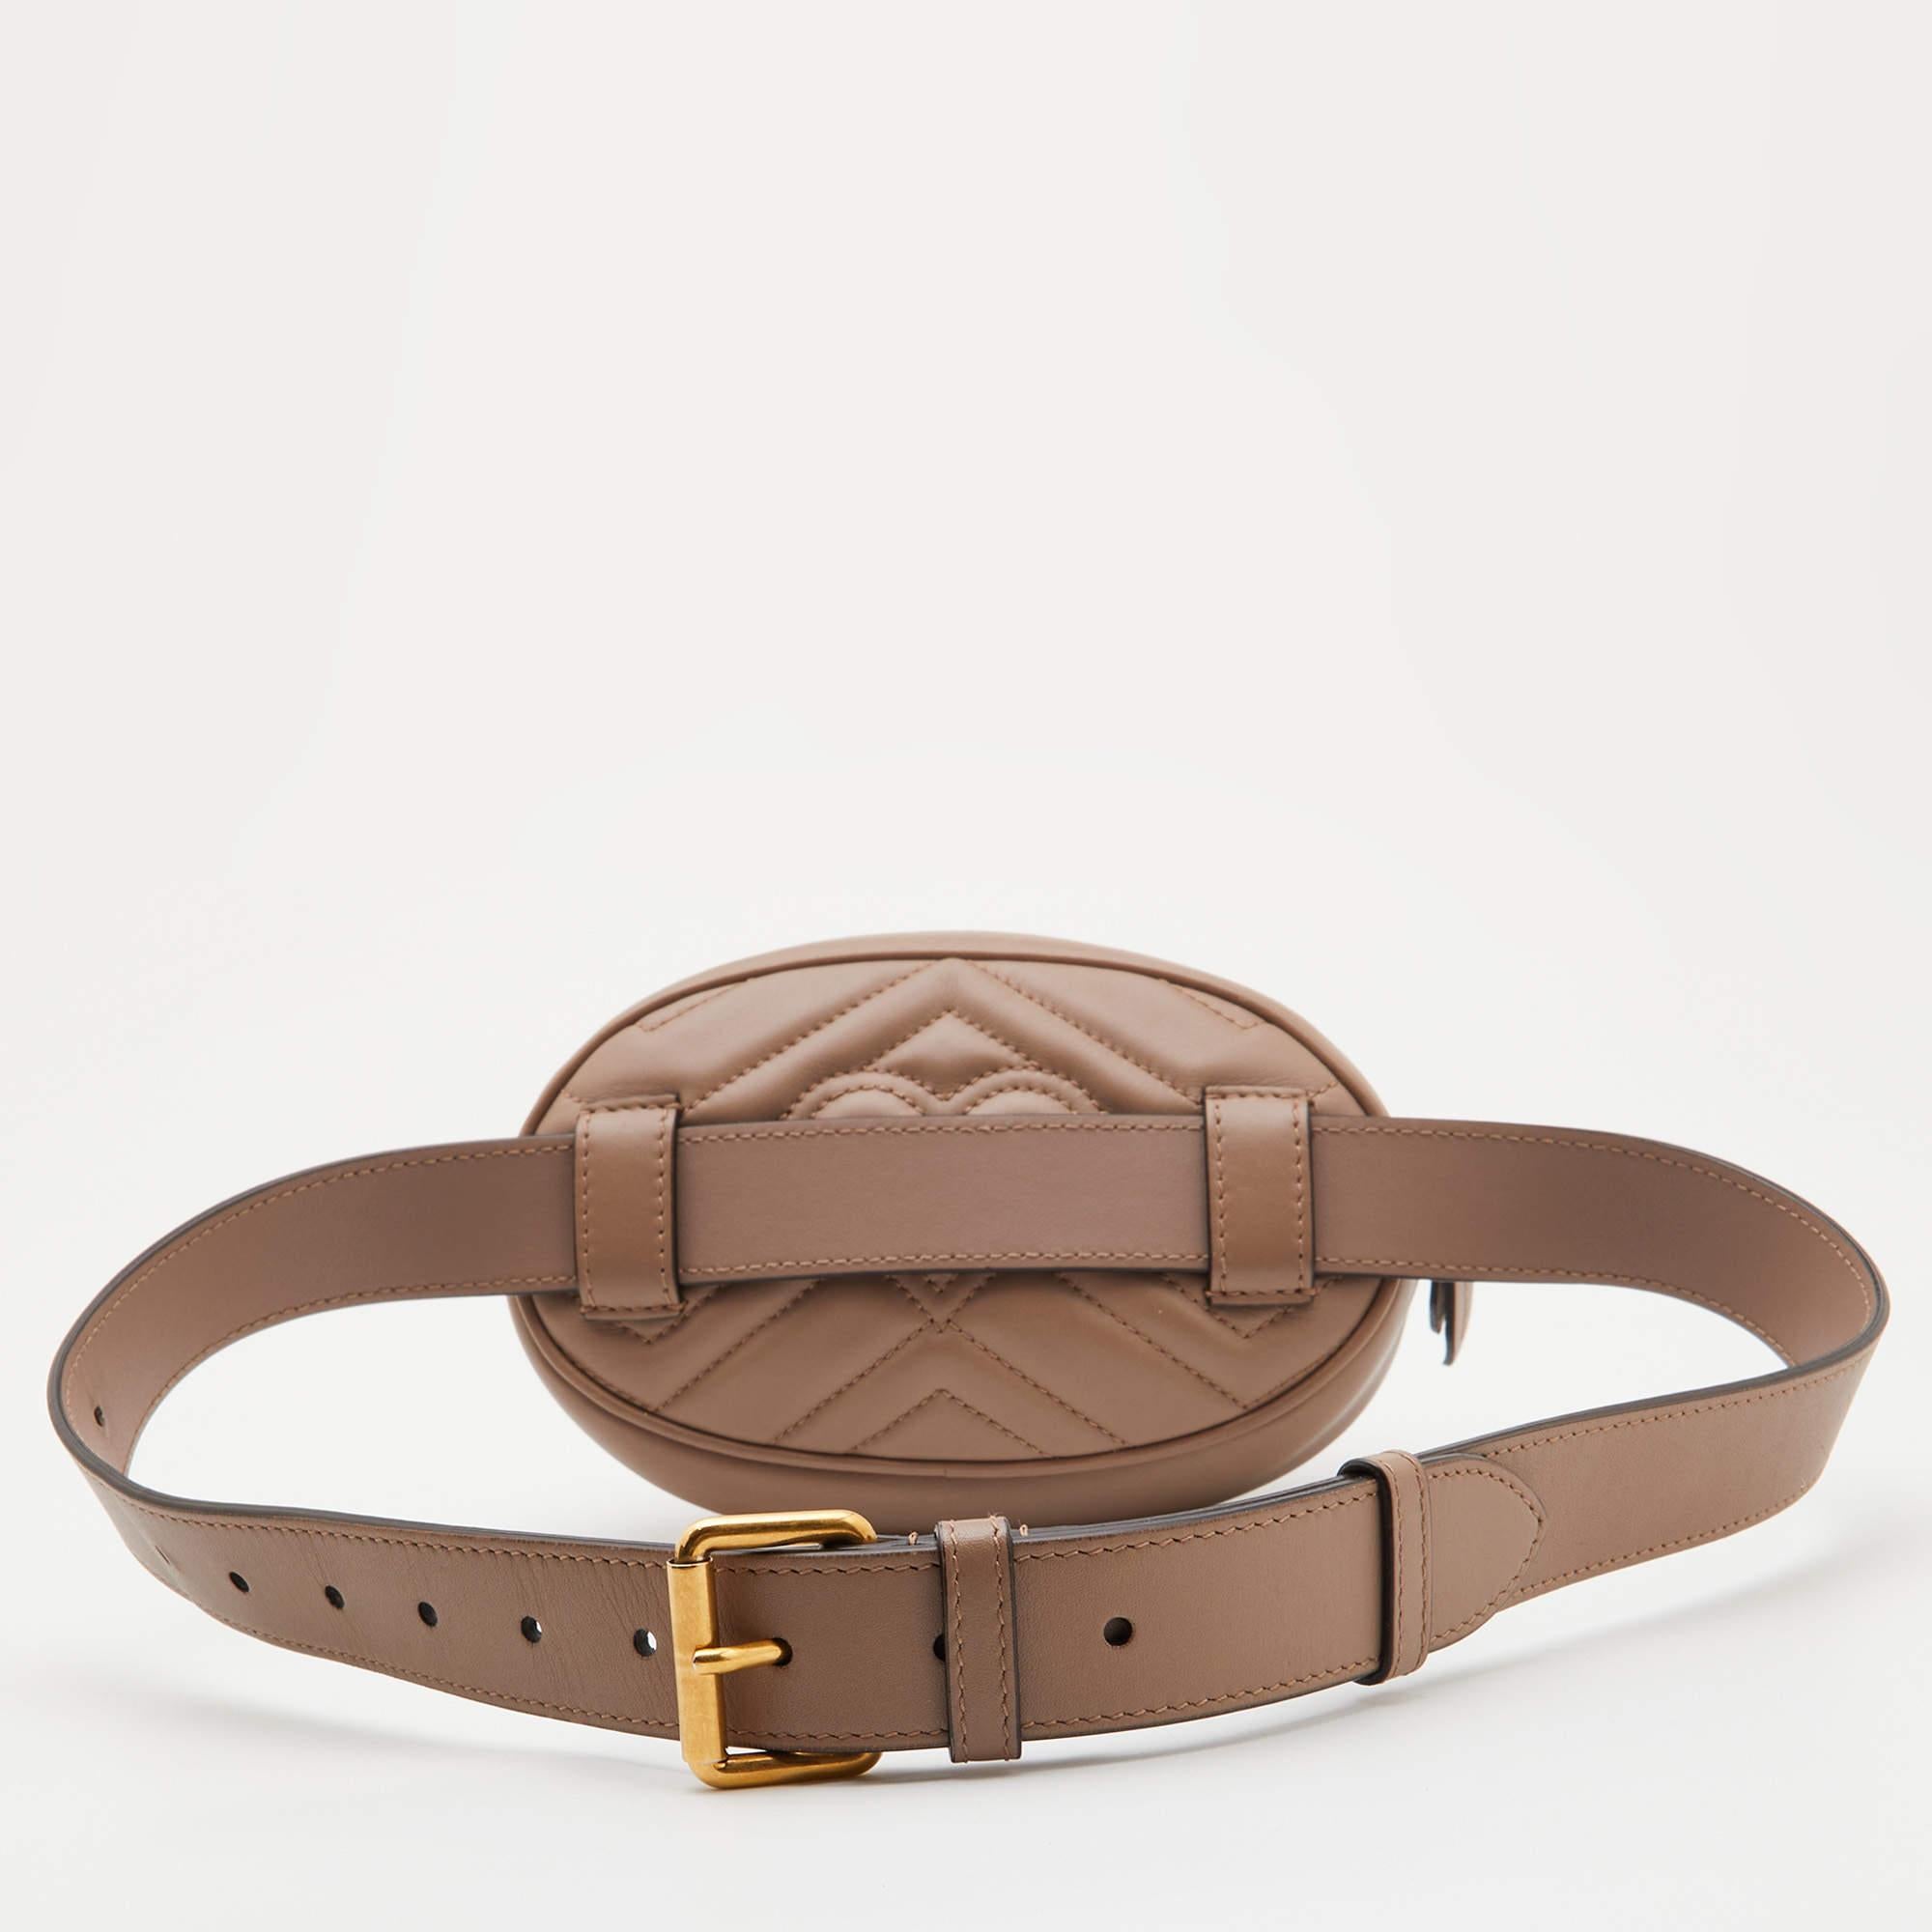 Innovative and sophisticated, this Gucci Marmont belt bag evokes a sense of classic glamour. Finely crafted from matelassé leather, it gets a luxe update with a double 'G' motif on the front.

Includes: Original Box
